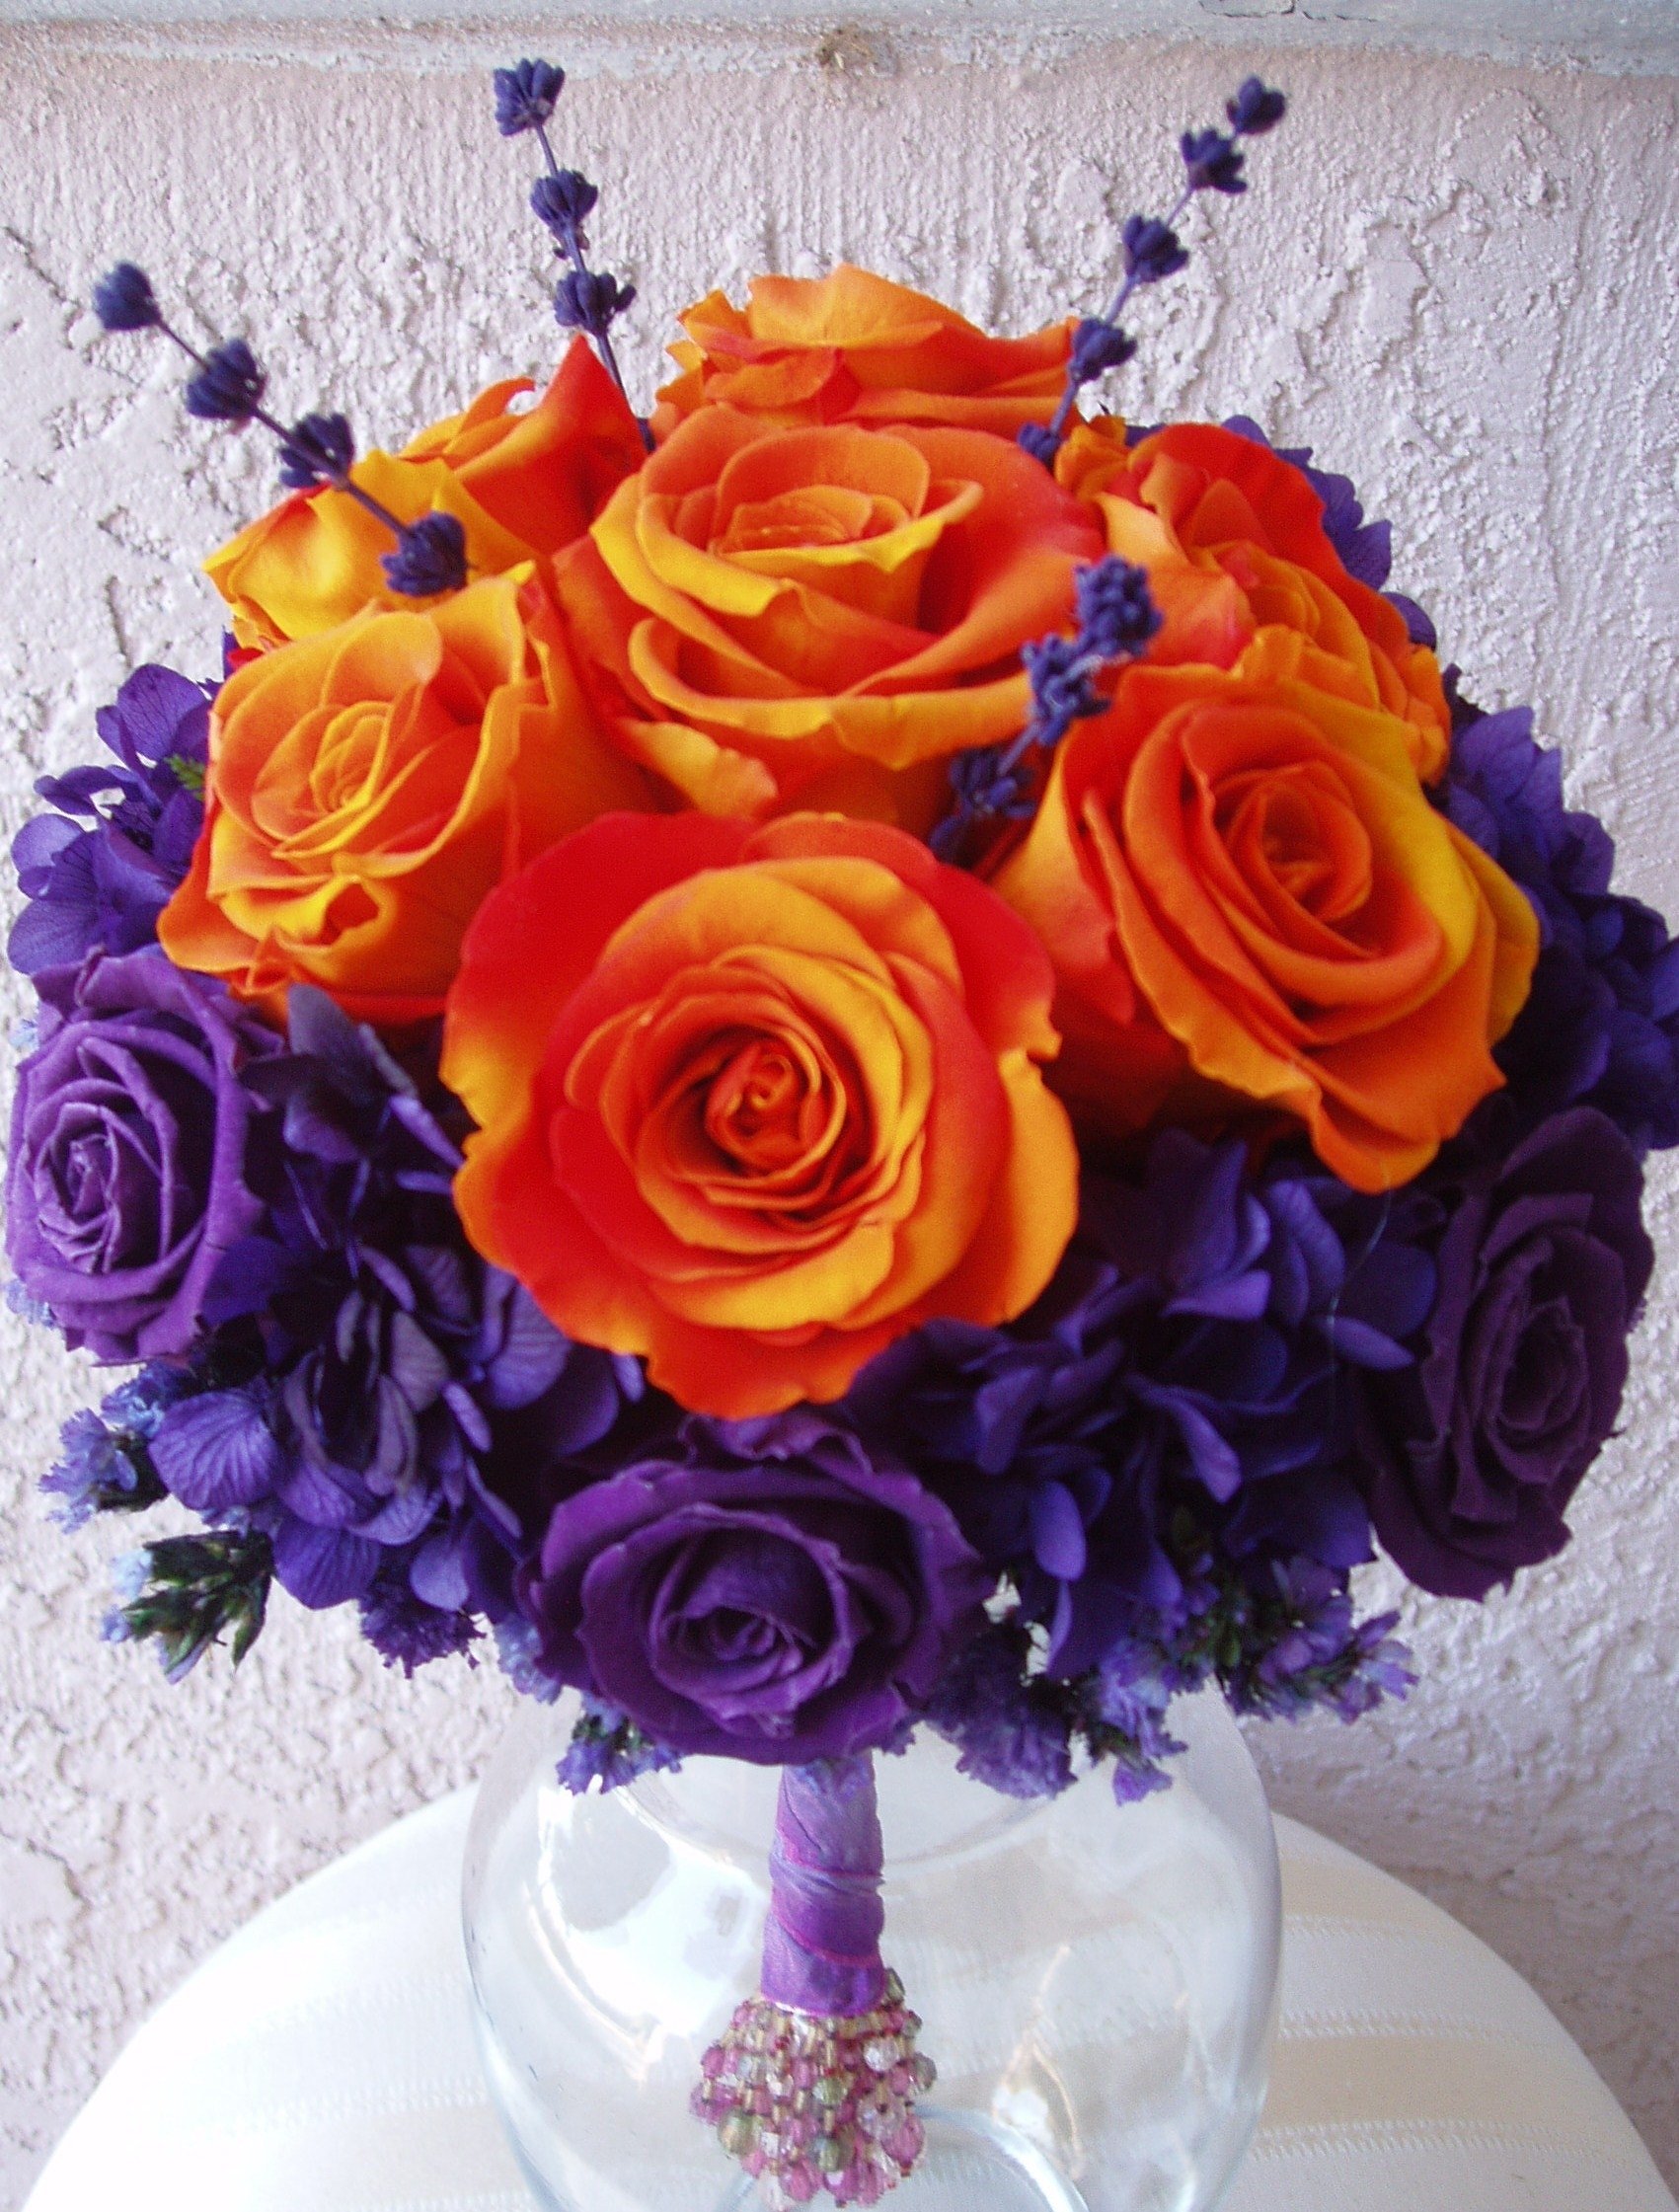 10 Best Purple And Orange Wedding Ideas orange and purple nice combo for flowers flowers and garden 2022